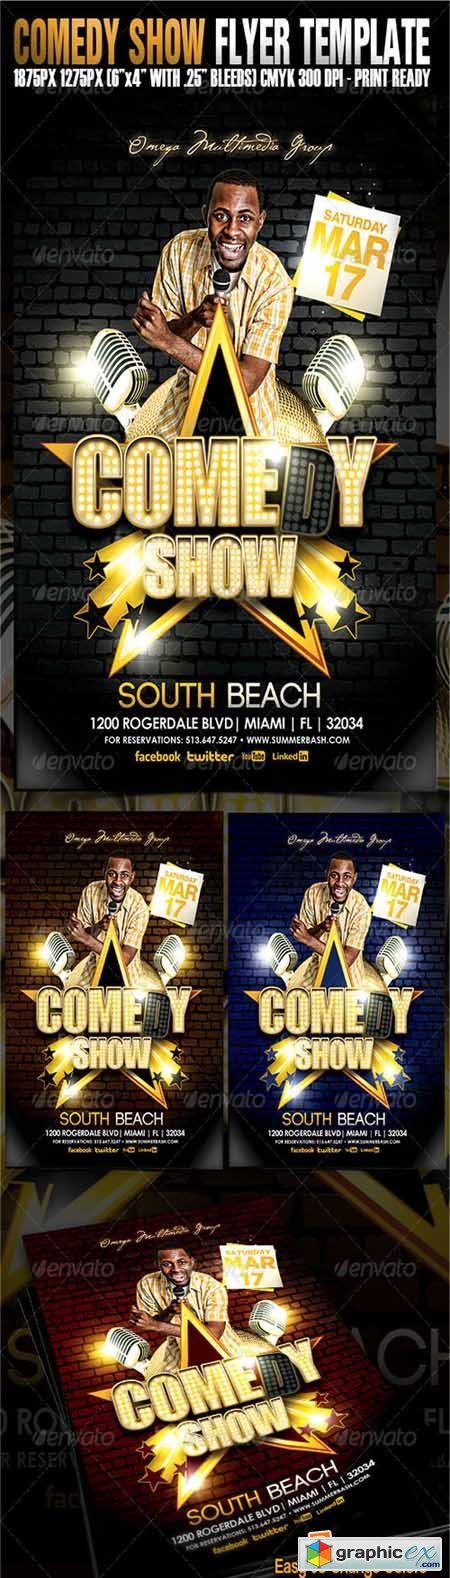  Comedy Show Flyer Template 3956376